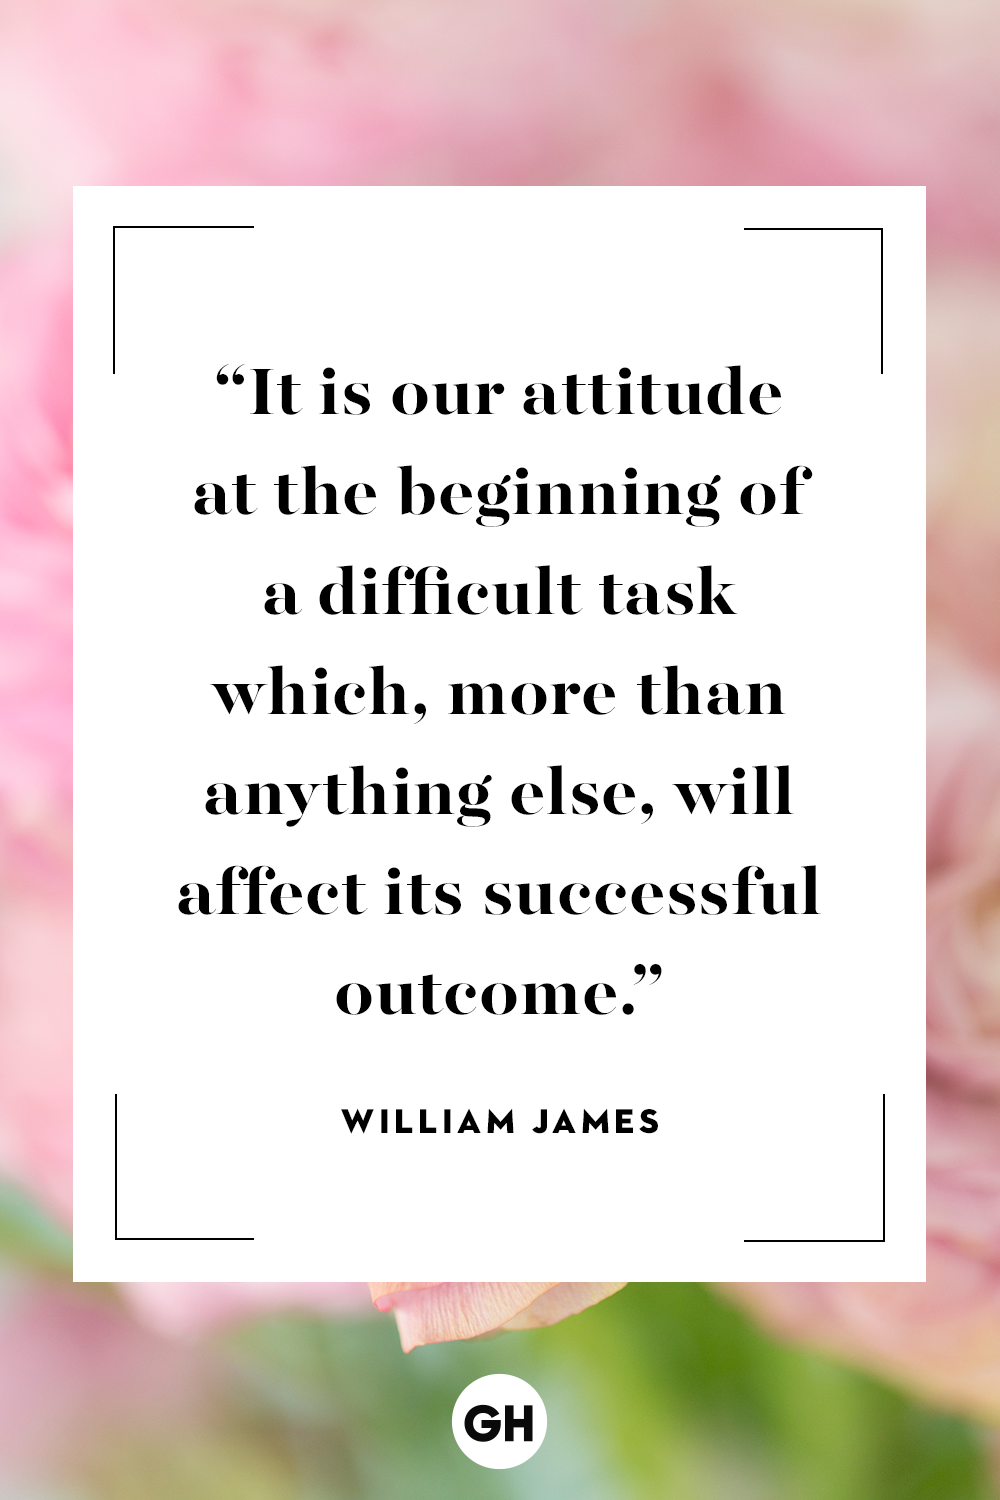 it is our attitude at the beginning of a difficult task which more than anything else will affect its successful outcome. william james